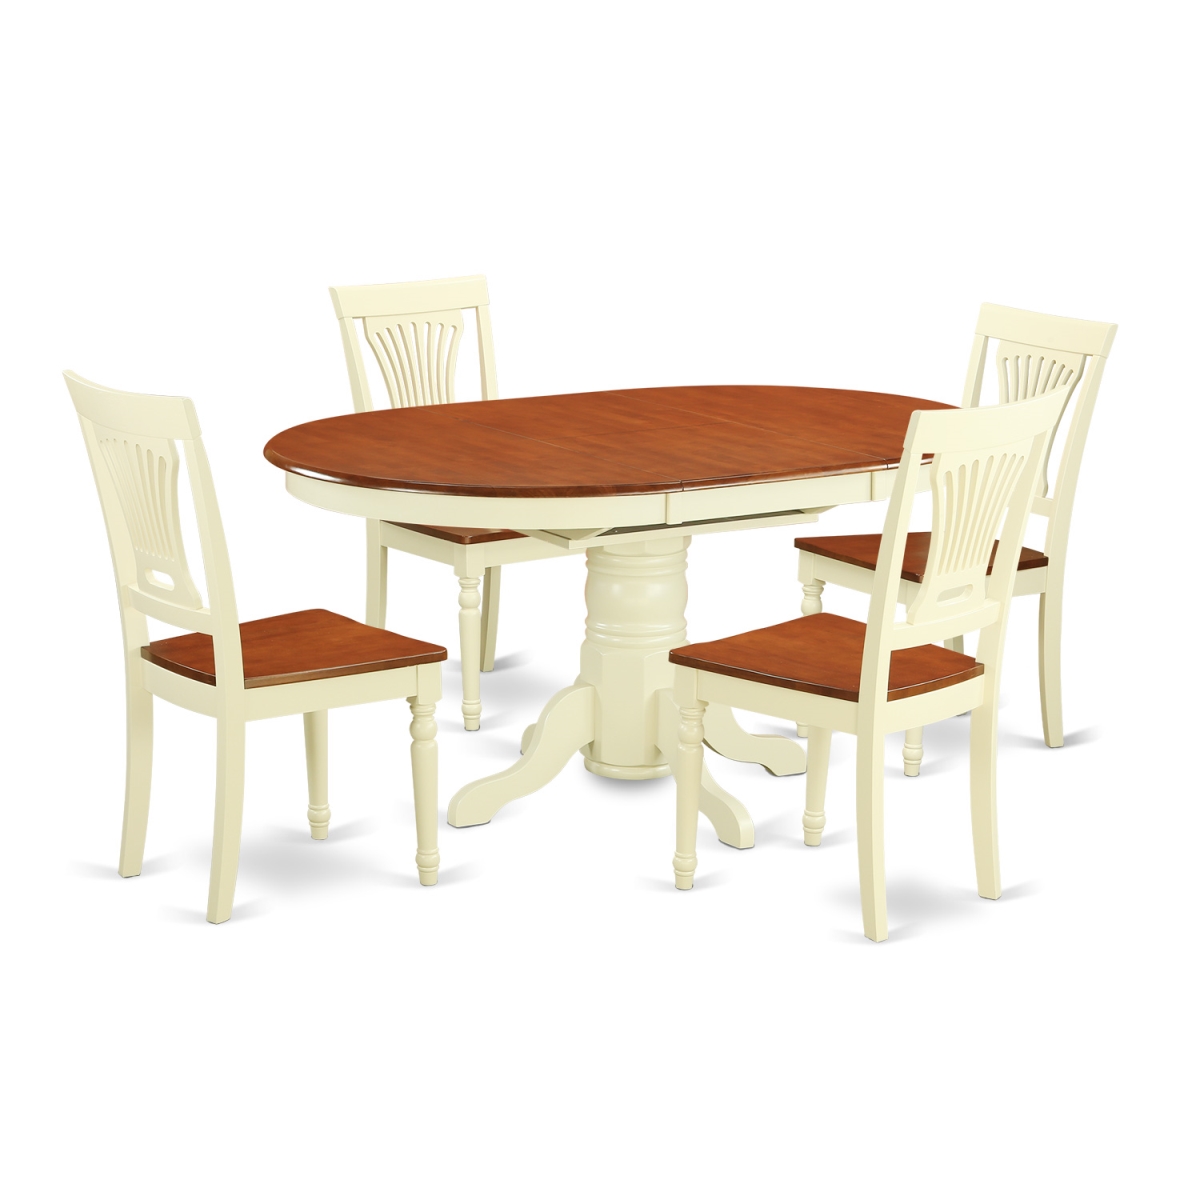 Picture of East West Furniture AVPL5-WHI-W Dining Table with a Leaf & Four Wood Seat Chairs, Buttermilk & Cherry - 5 Piece